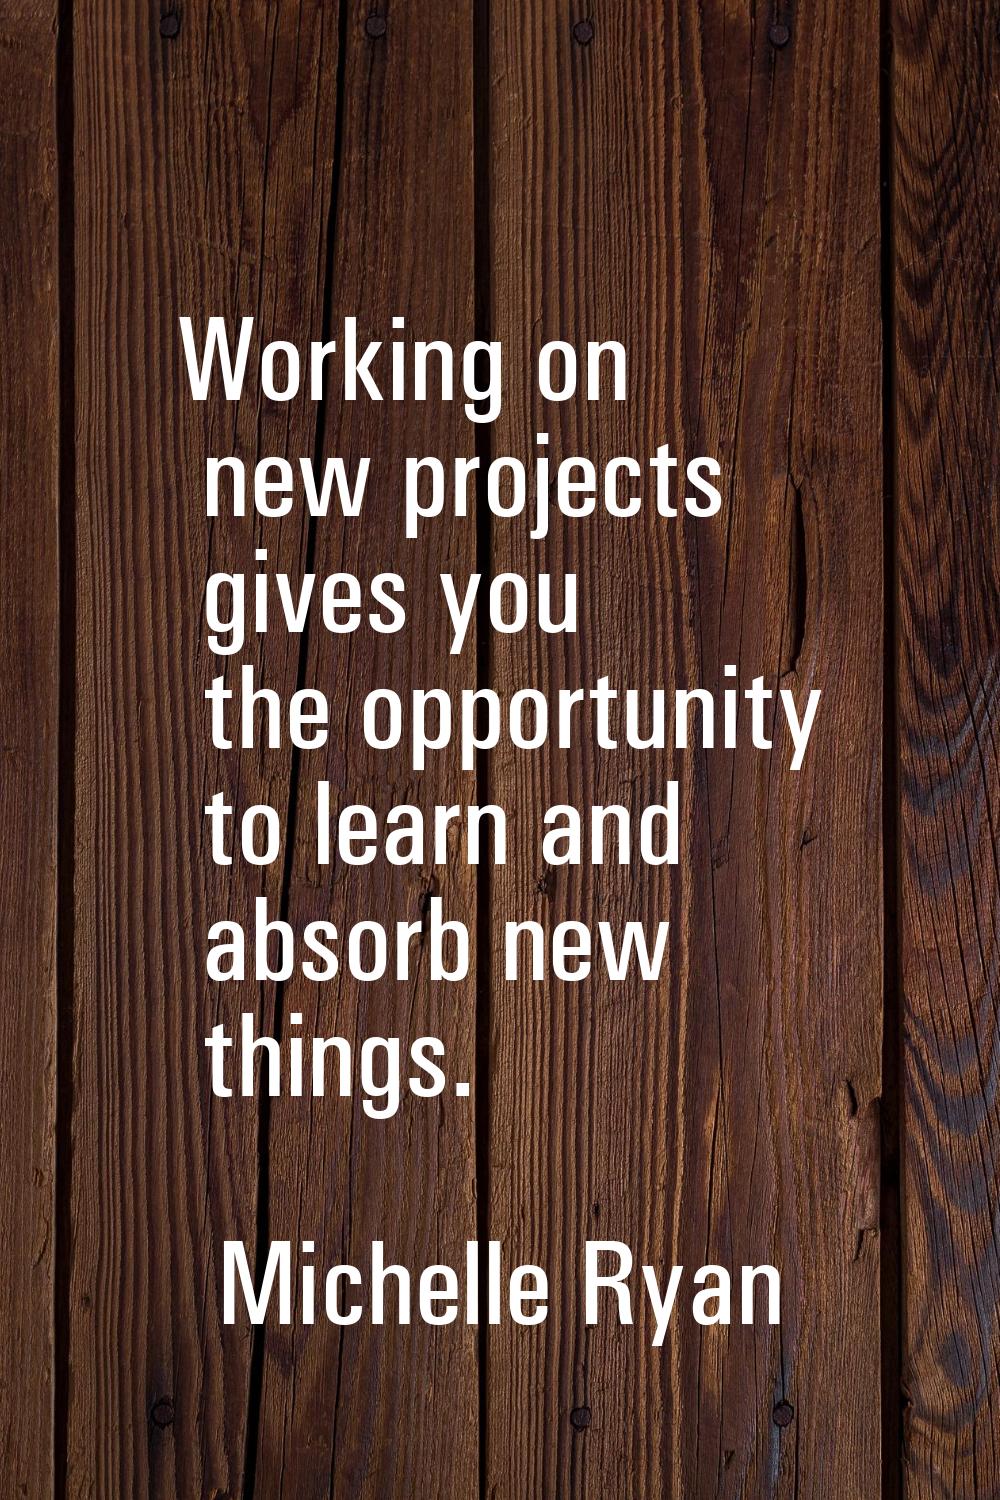 Working on new projects gives you the opportunity to learn and absorb new things.